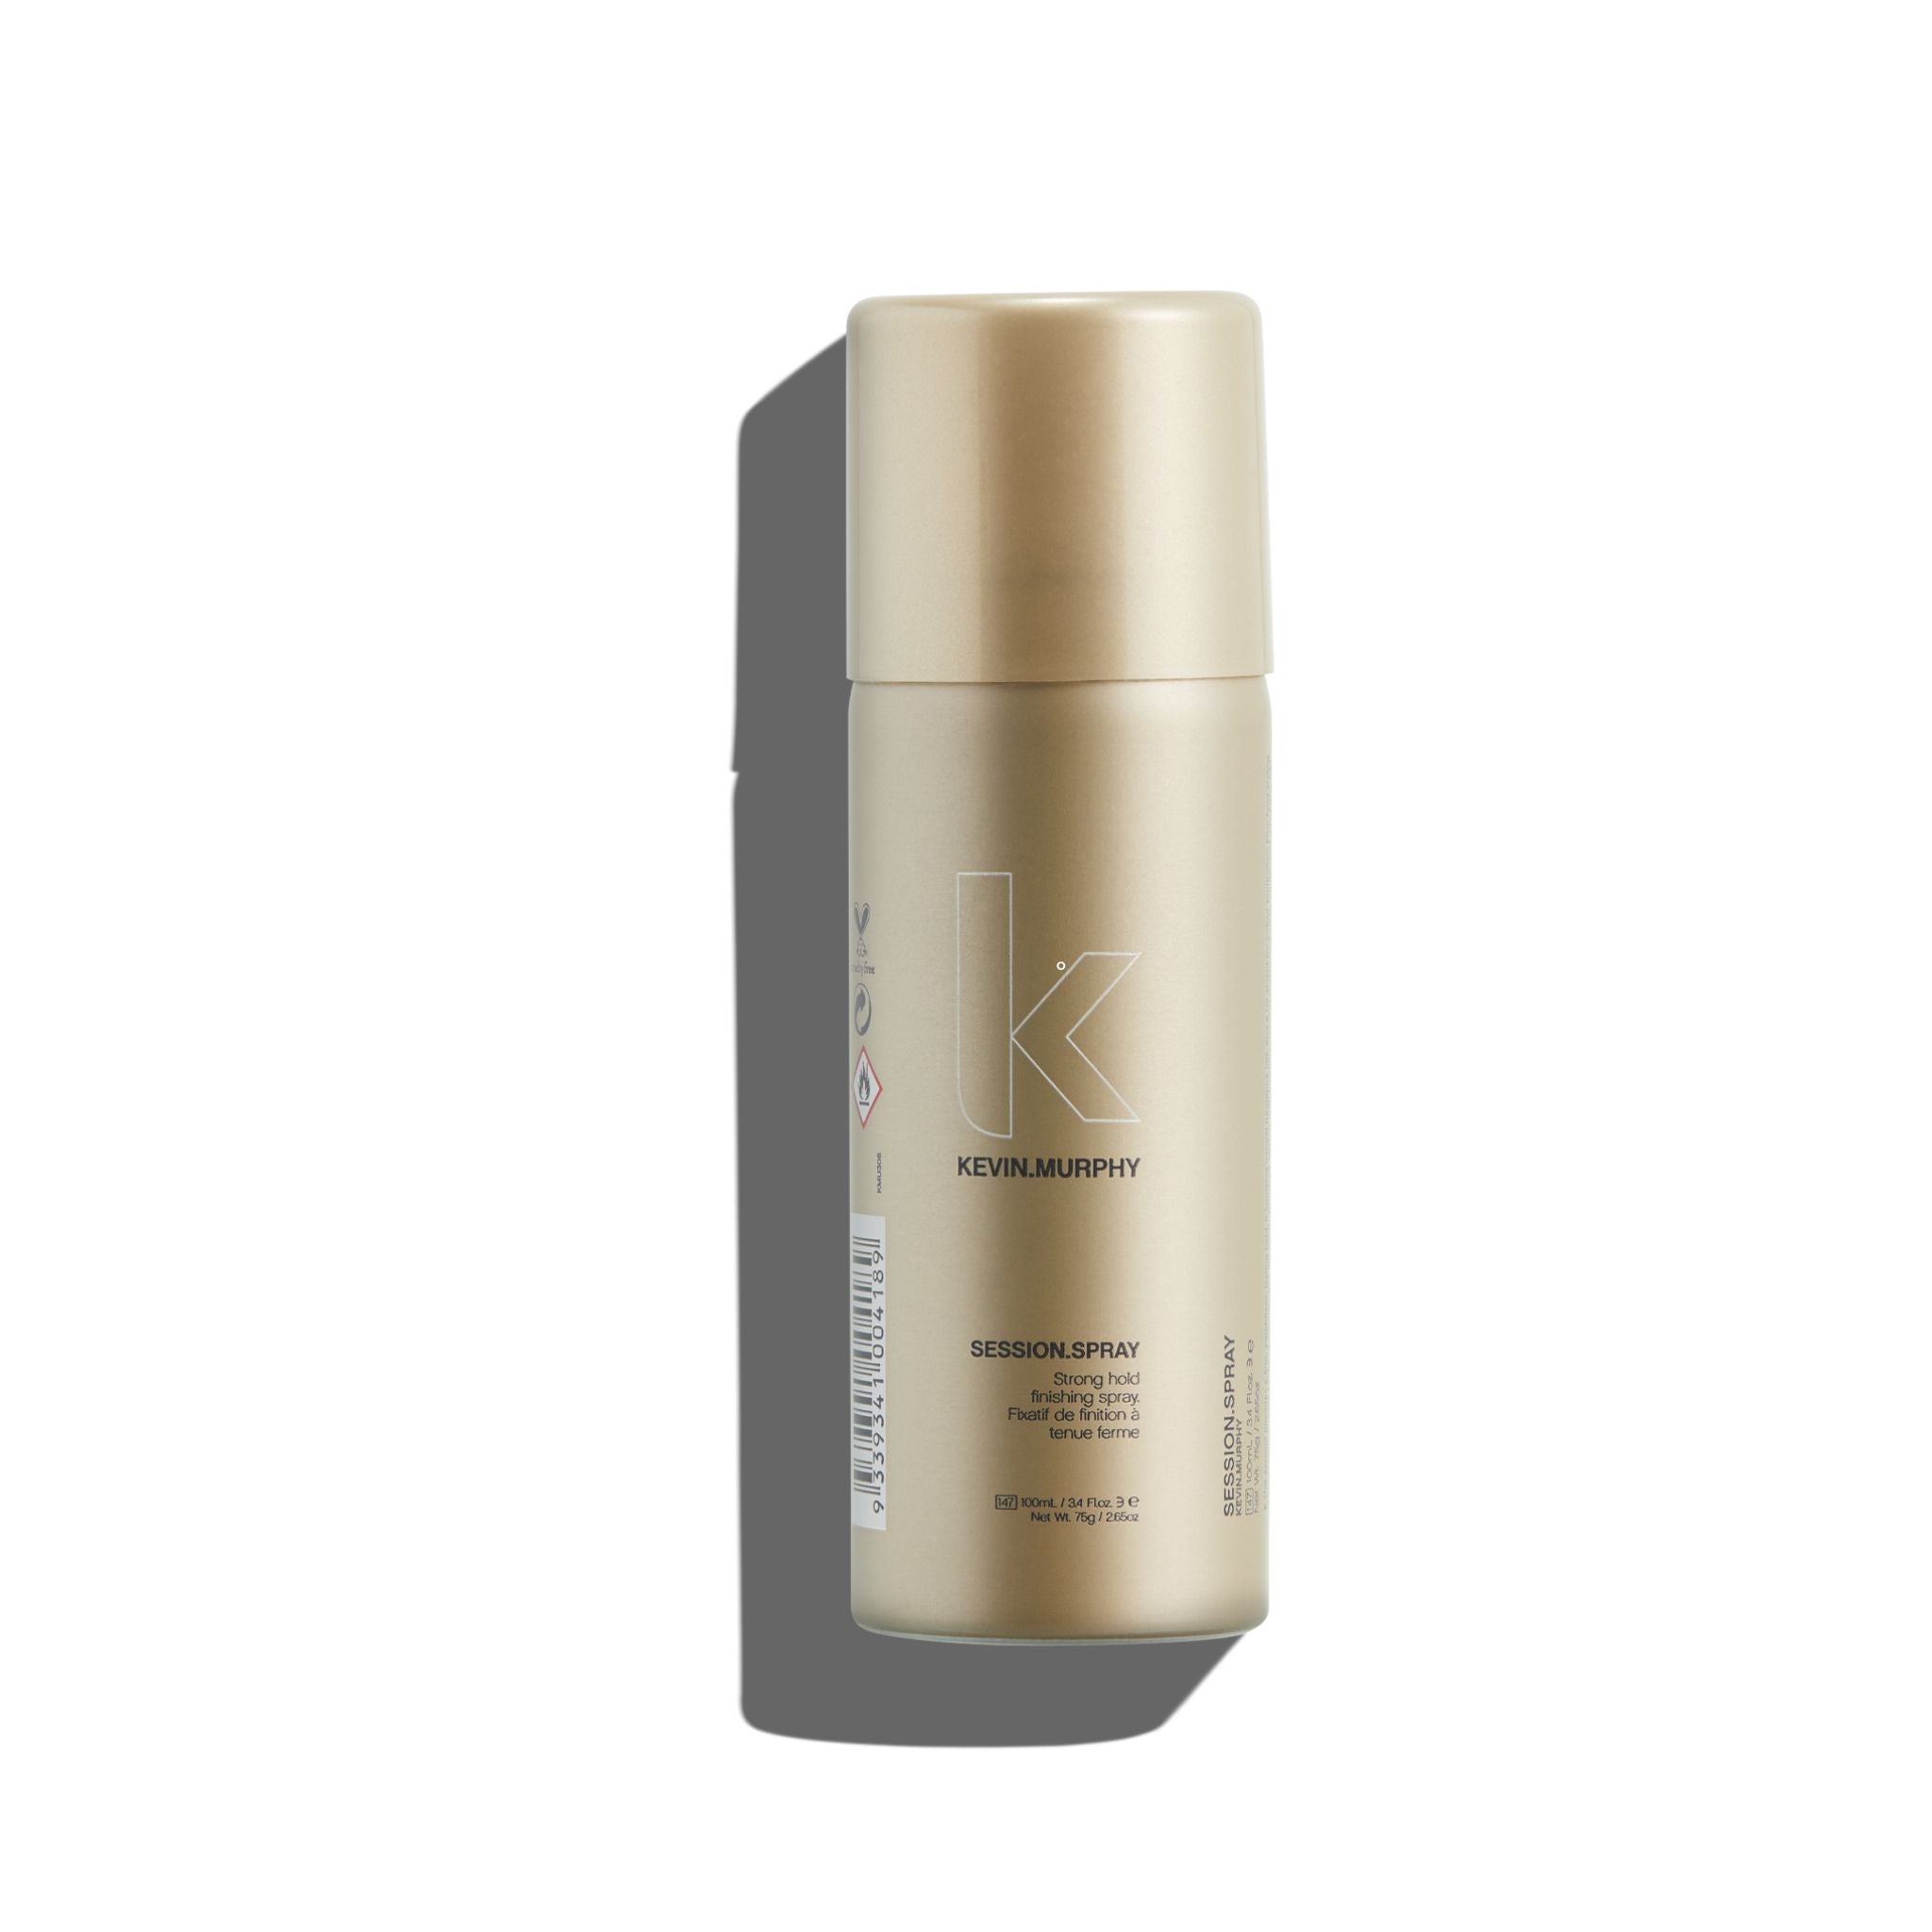 Kevin Murphy - Session Spray 100ml - Travel